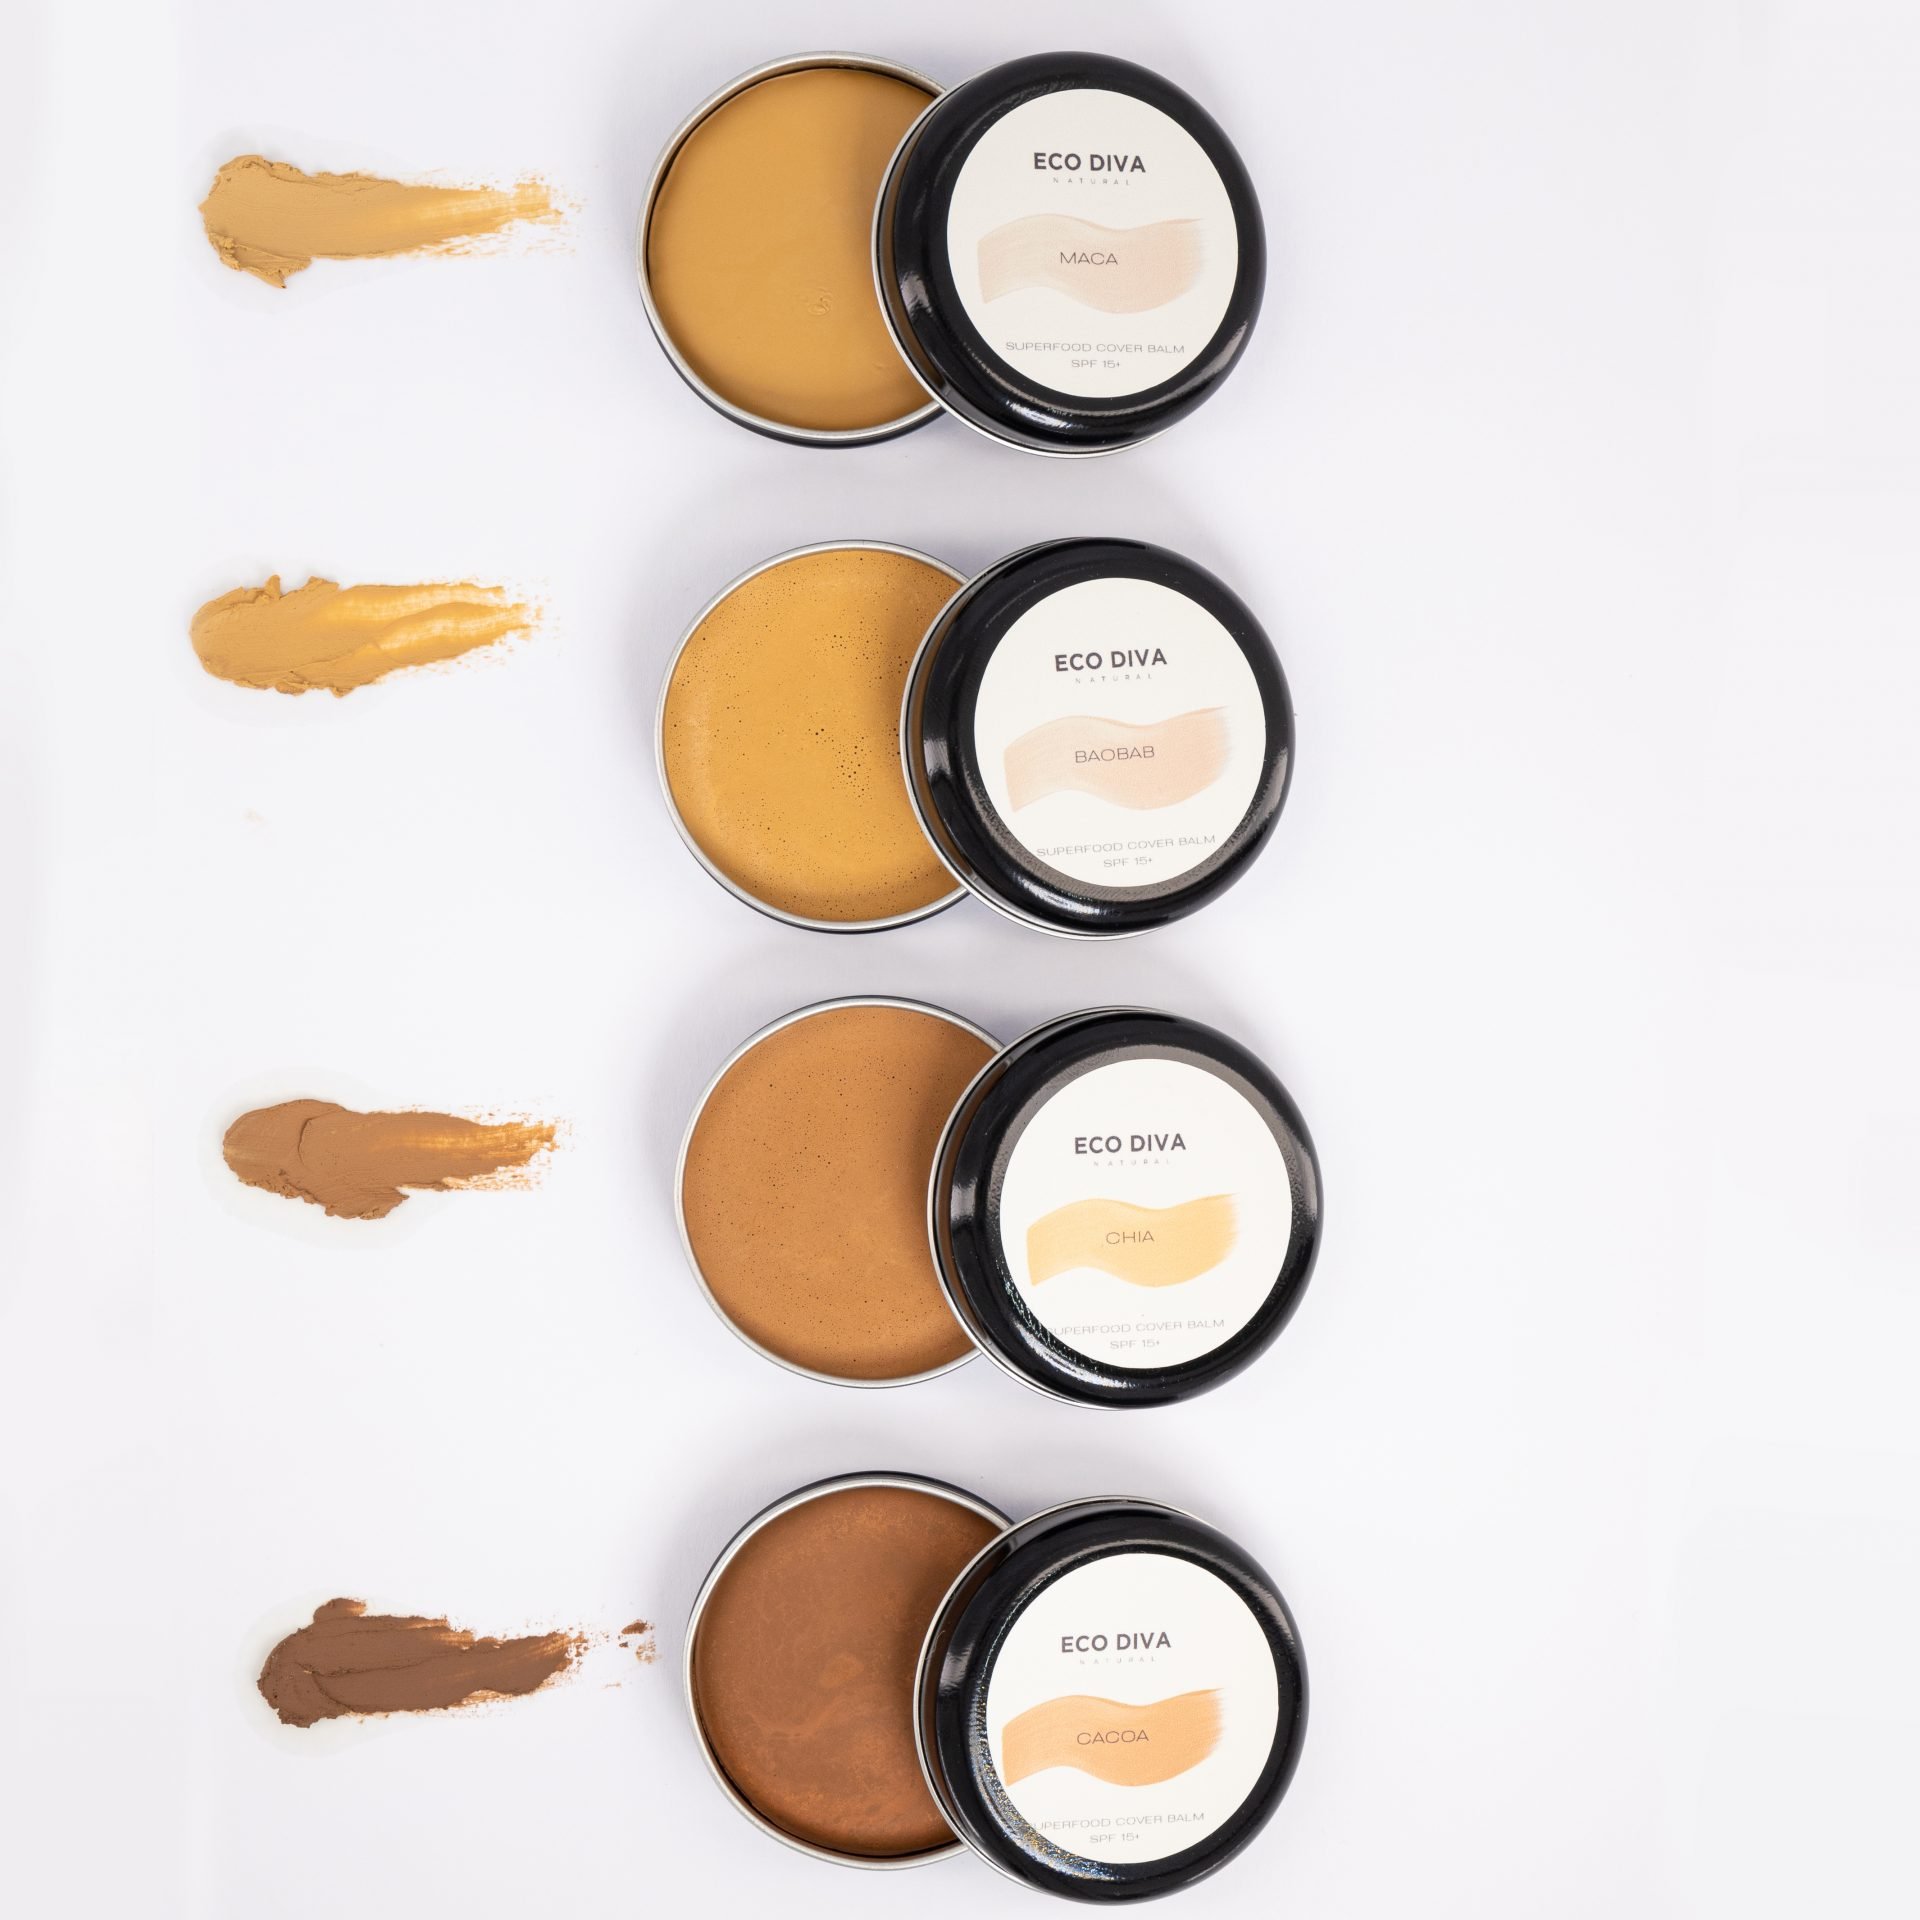 Eco Diva launches new superfood makeup cover balms 3